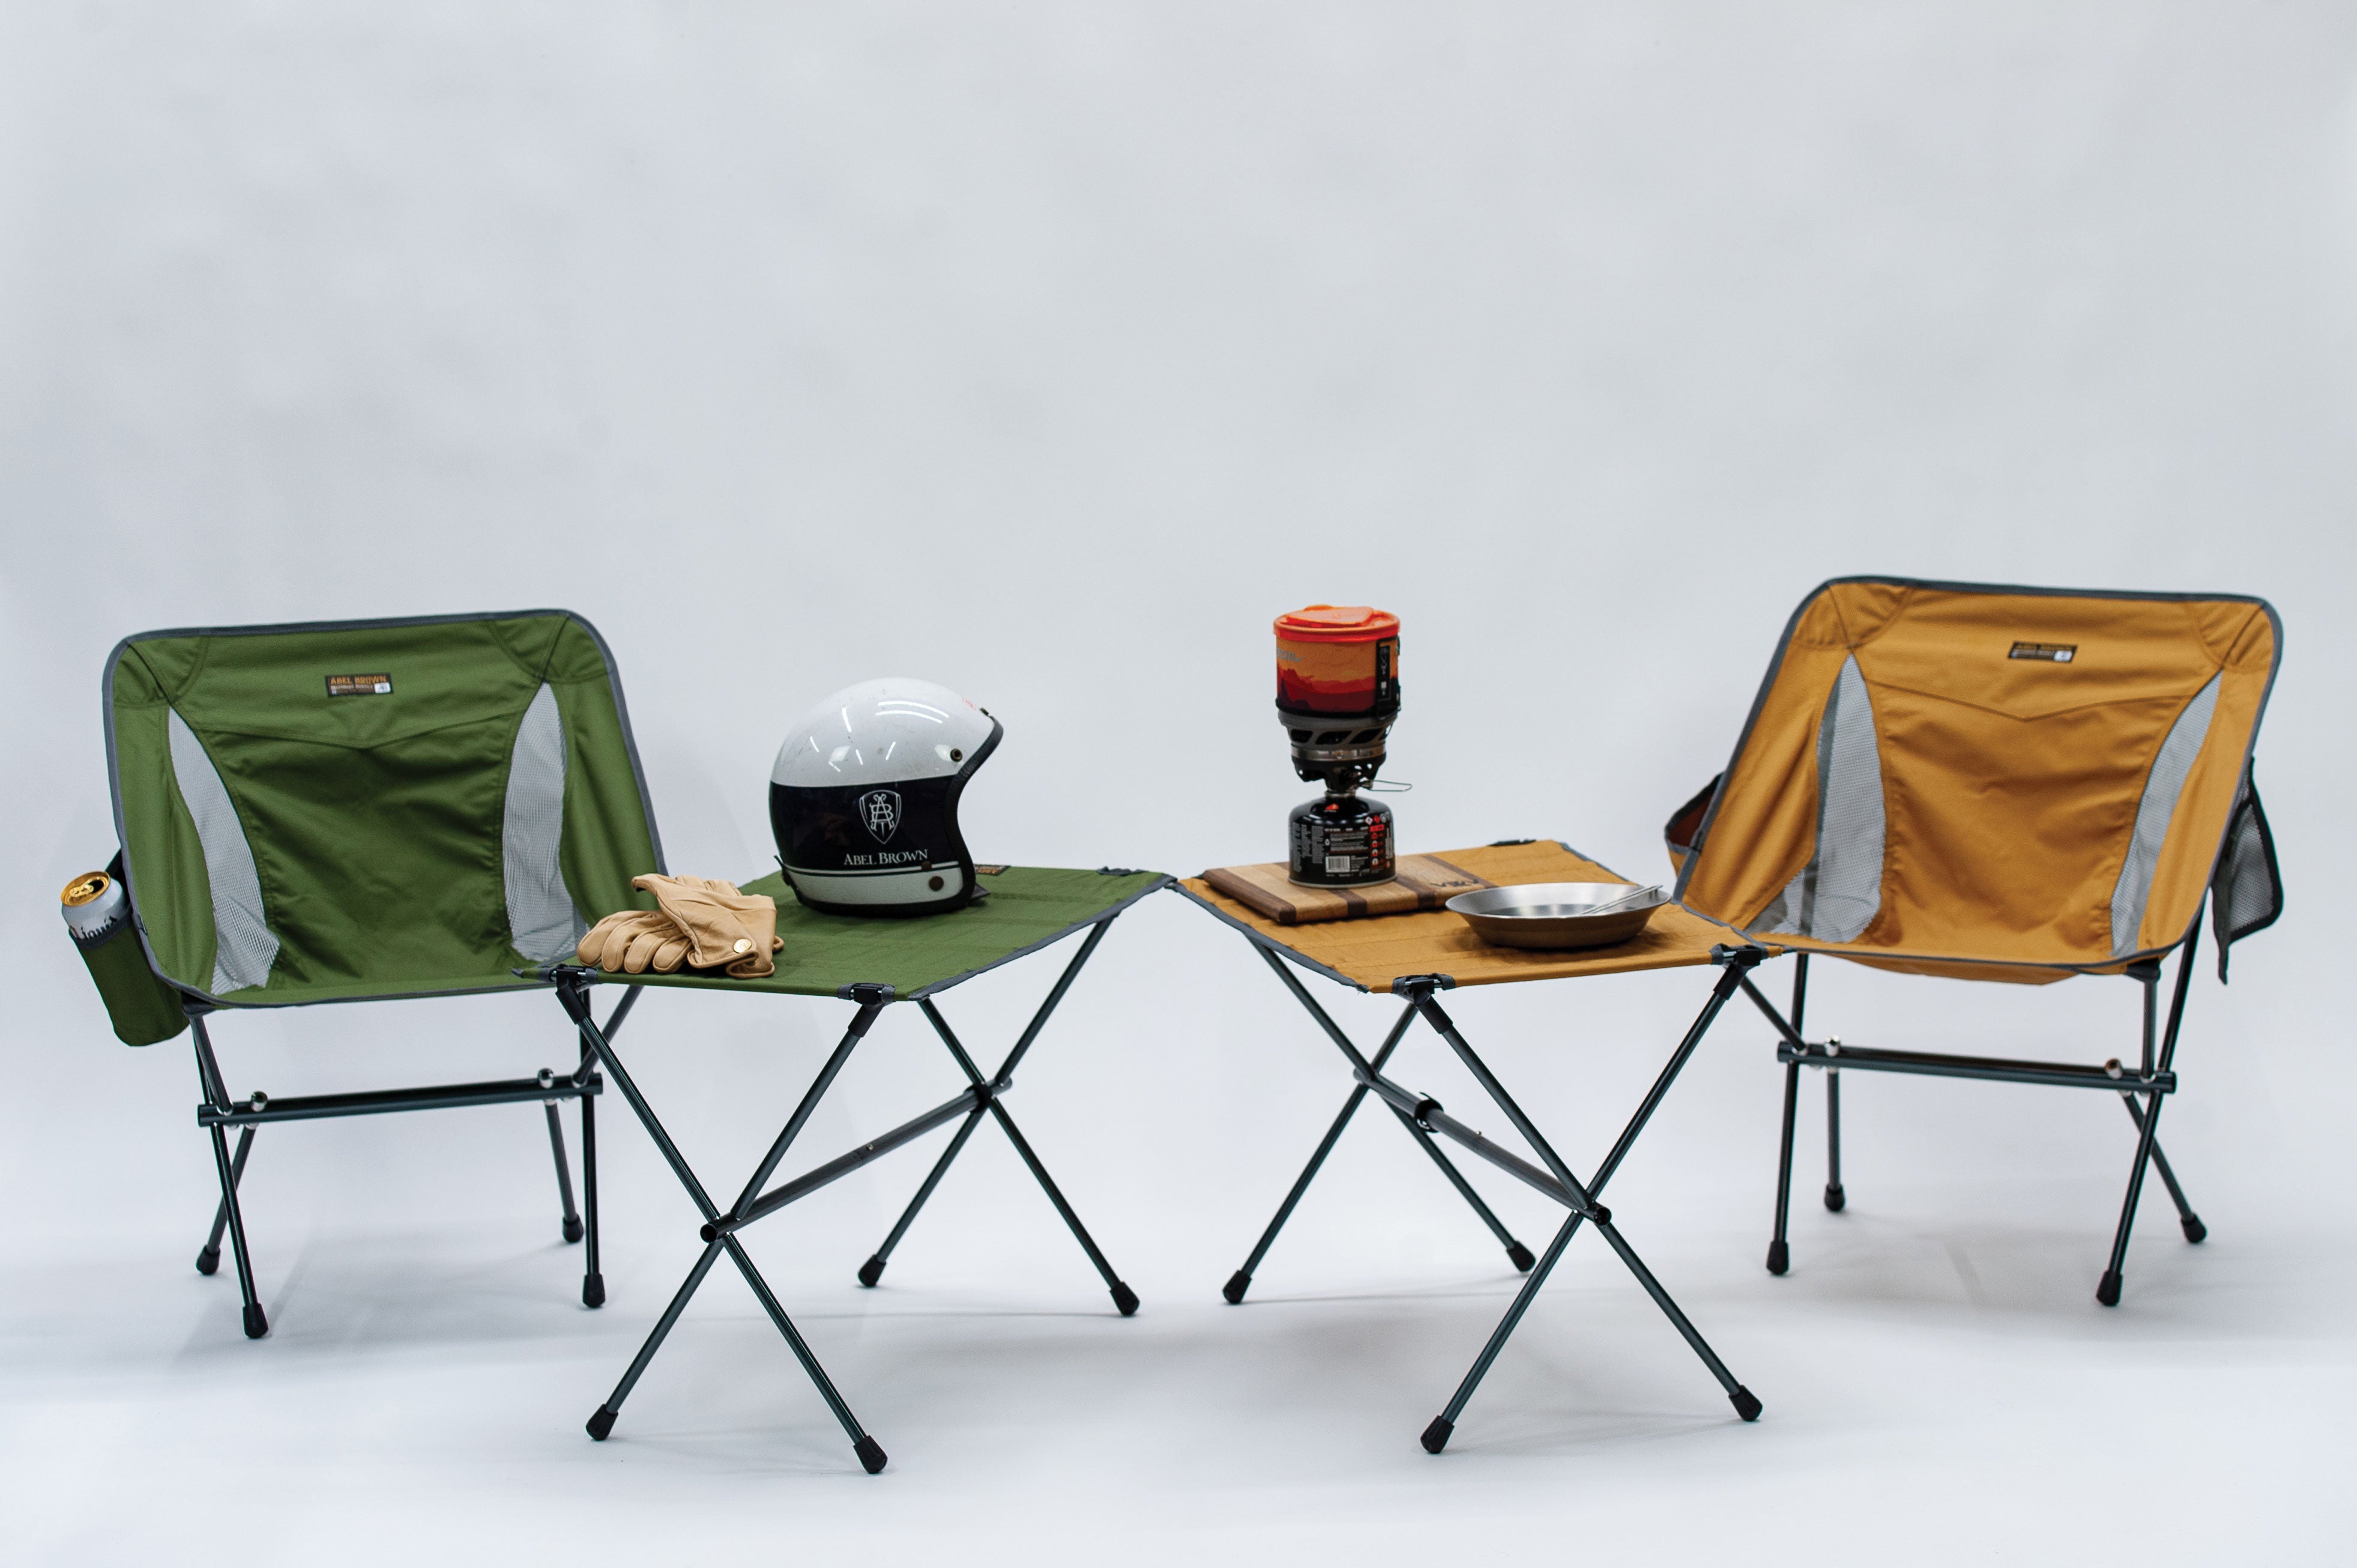 Nomad Camp Chair